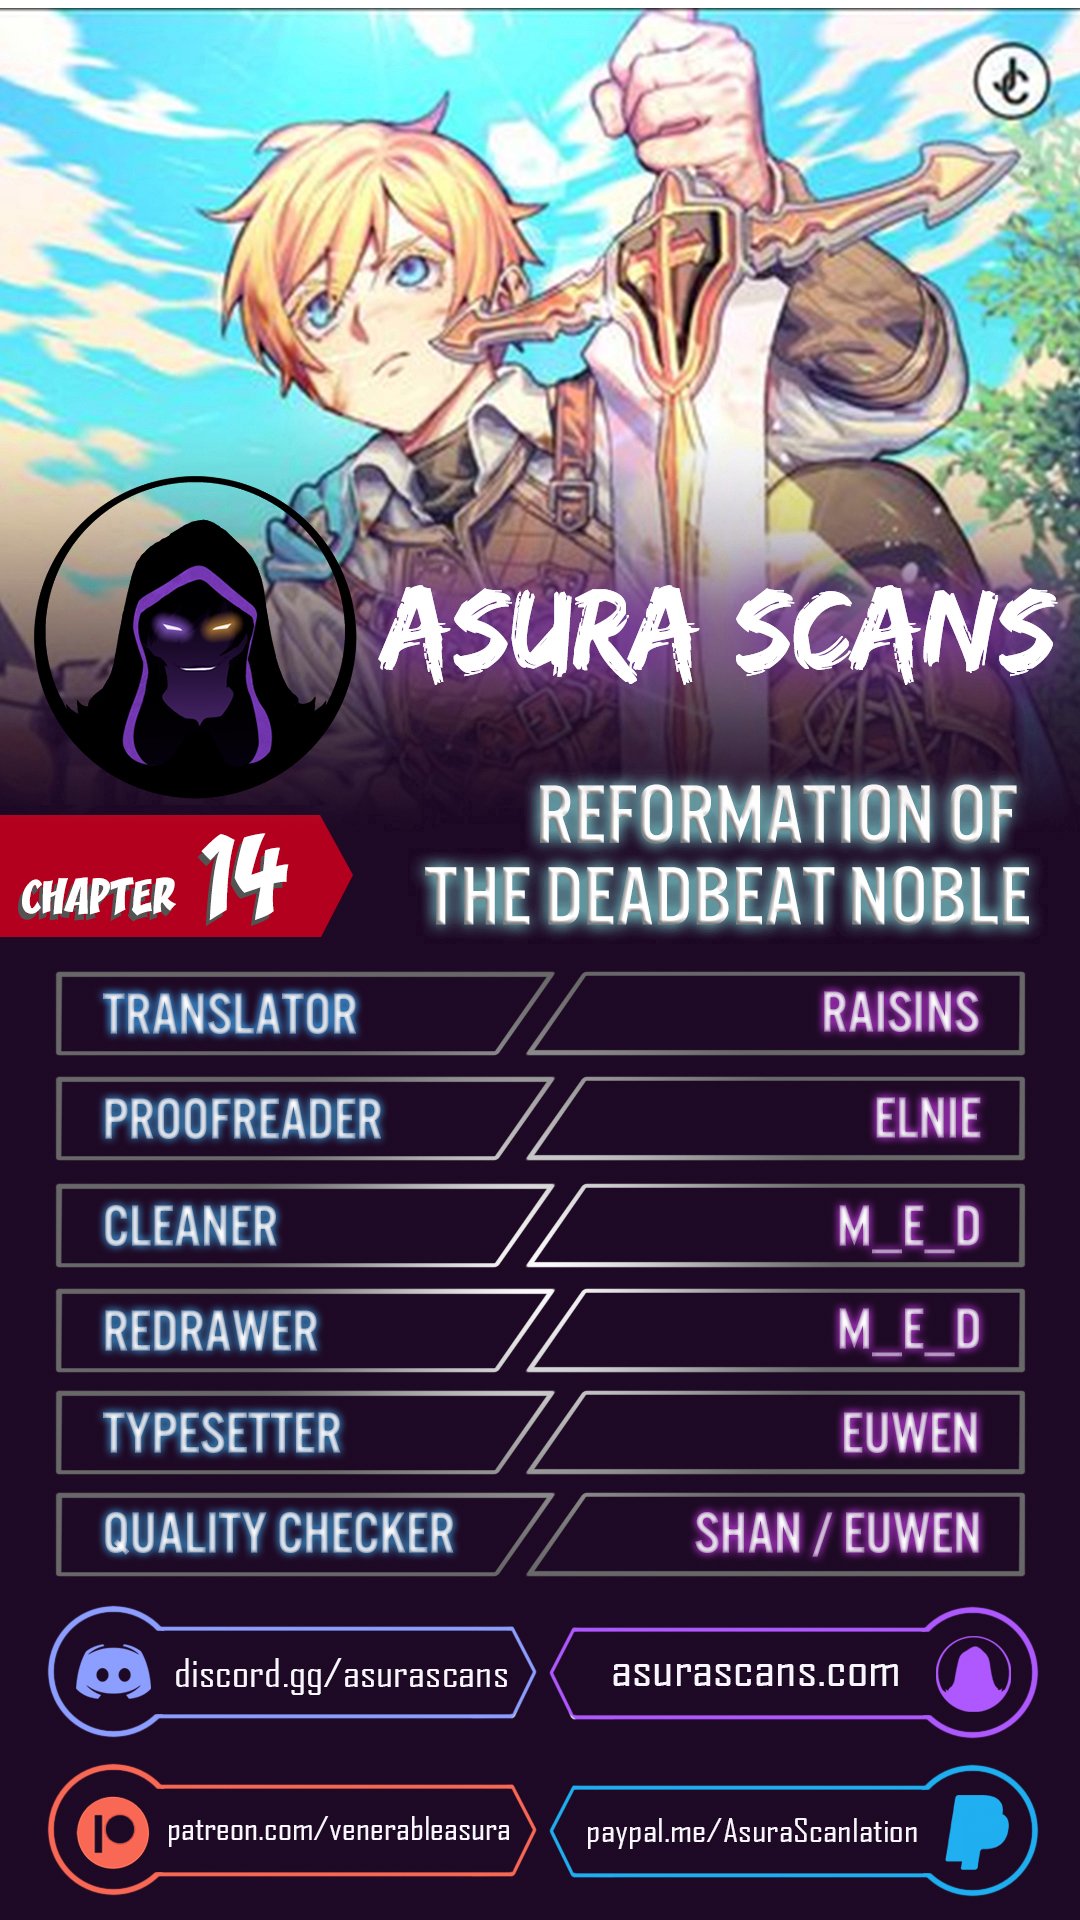 Reformation of the Deadbeat Noble - Chapter 19405 - Image 1